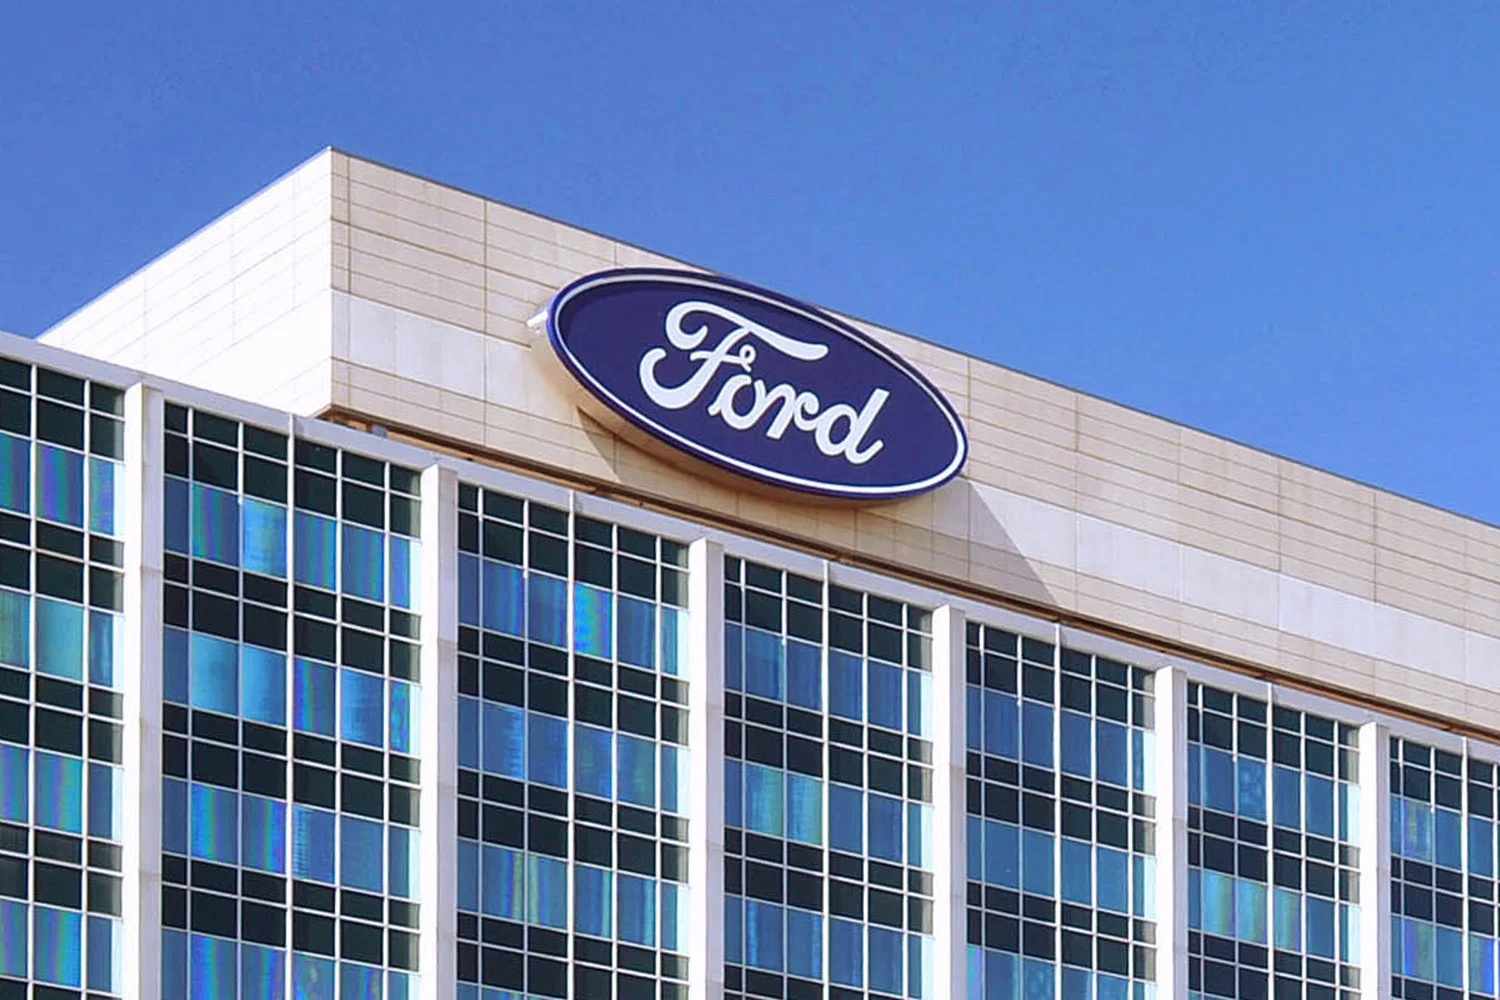 Ford Leads For Automotive Category in JUST 100 Corporate Rankings